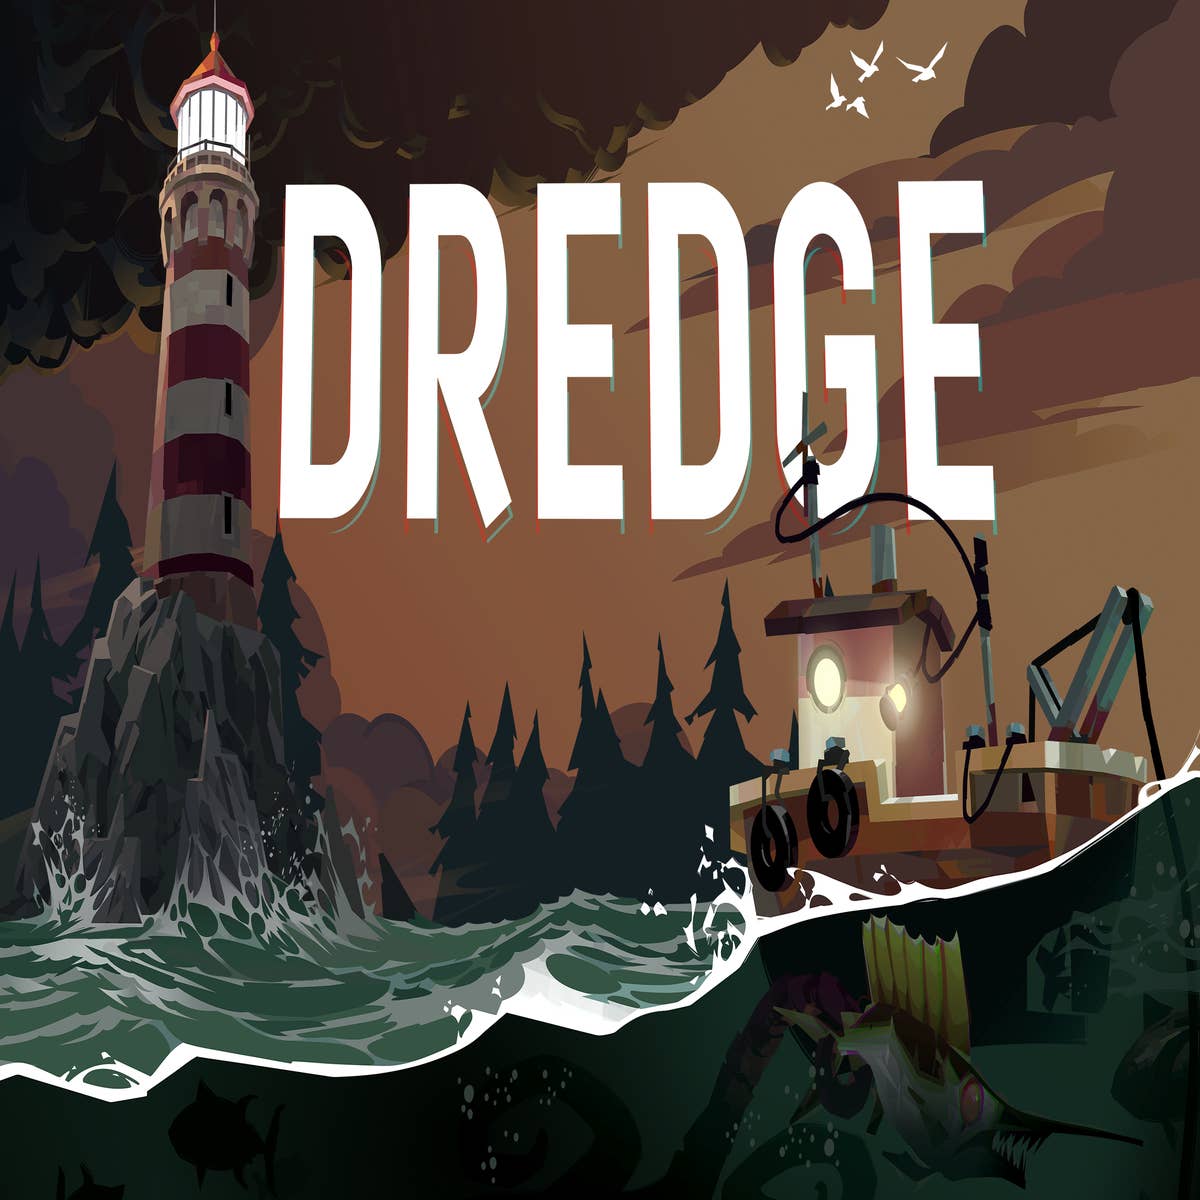 You can now try fishing game Dredge before you buy with this new